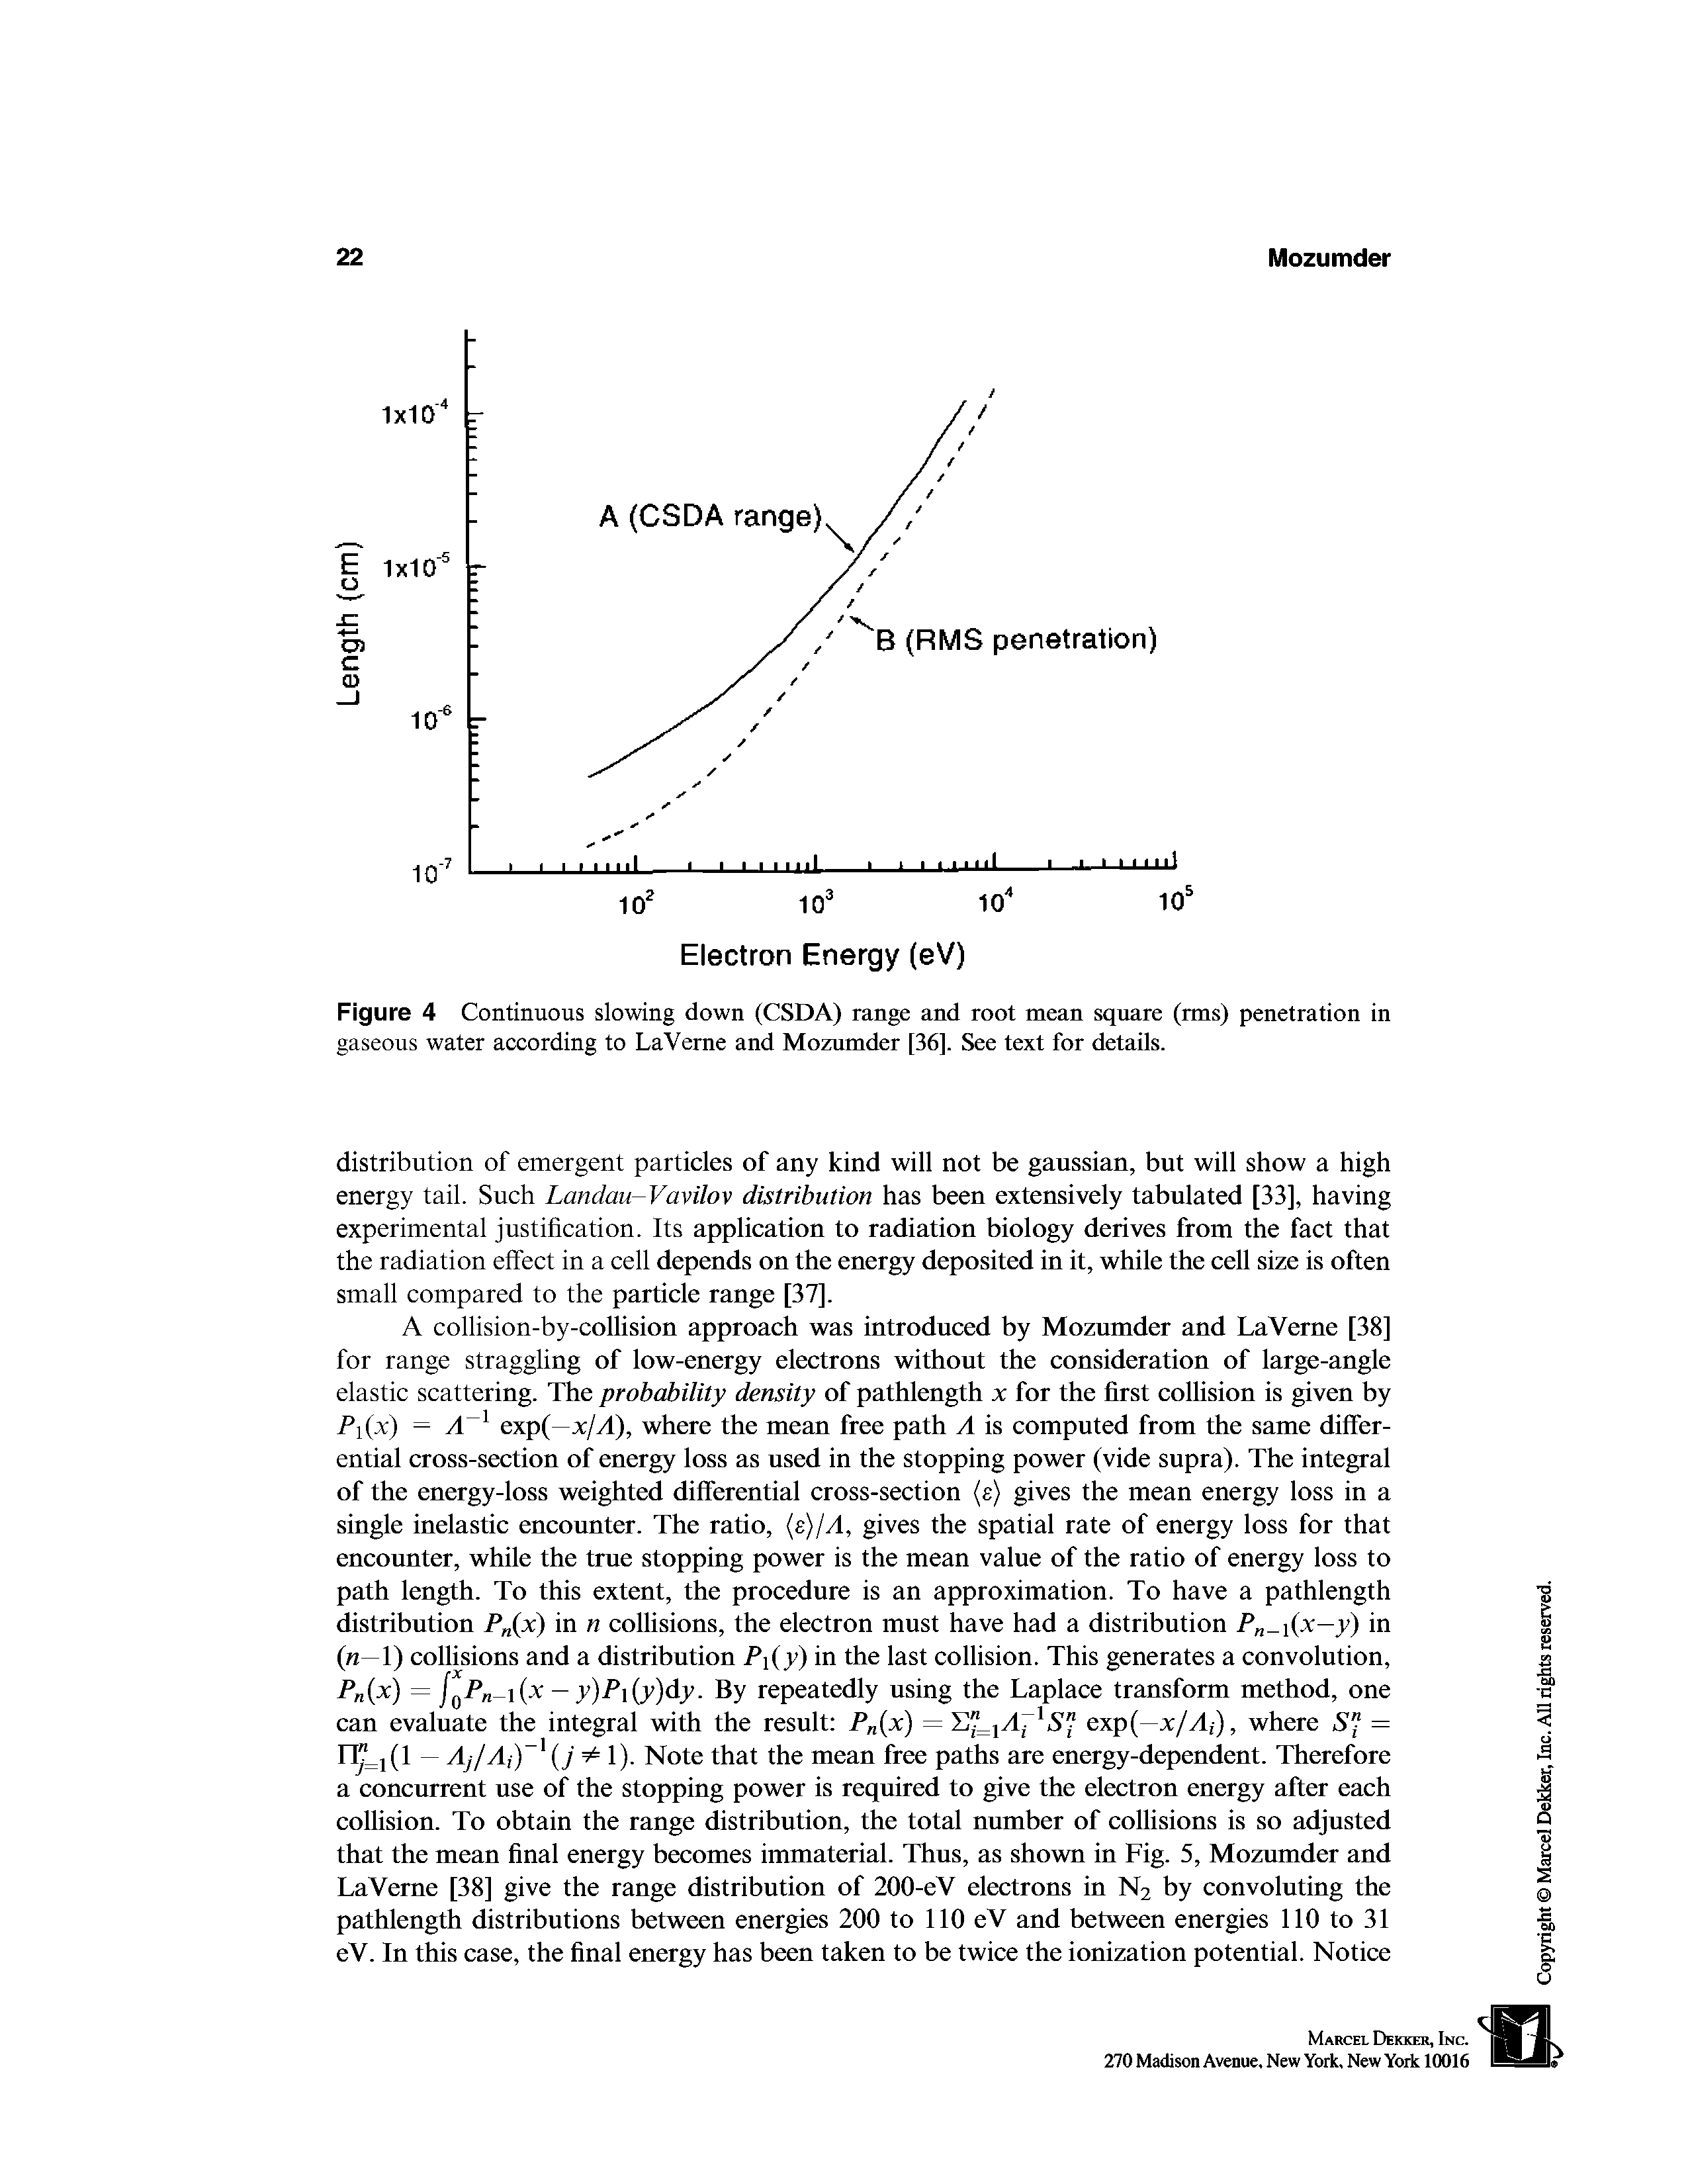 Figure 4 Continuous slowing down (CSDA) range and root mean square (rms) penetration in gaseous water according to LaVerne and Mozumder [36]. See text for details.